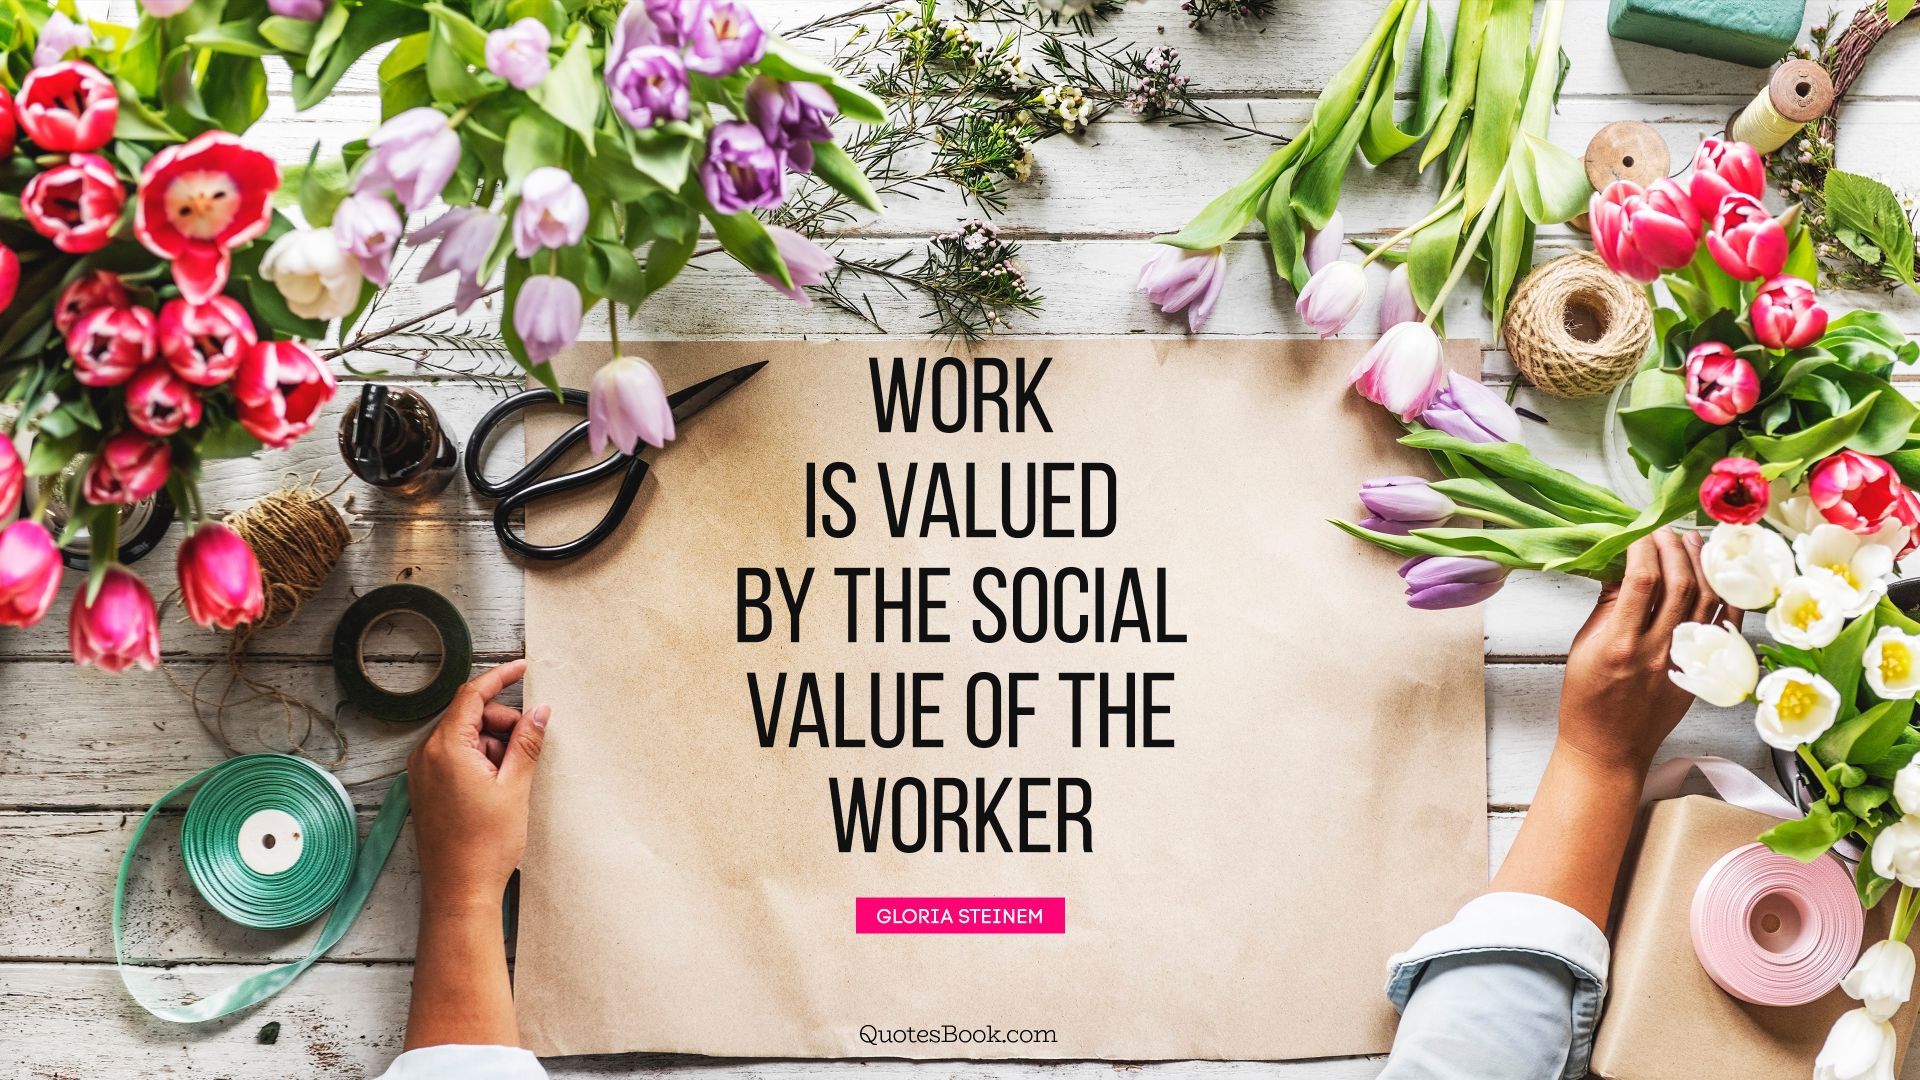 Work is valued by the social value of the worker. - Quote by Gloria Steinem